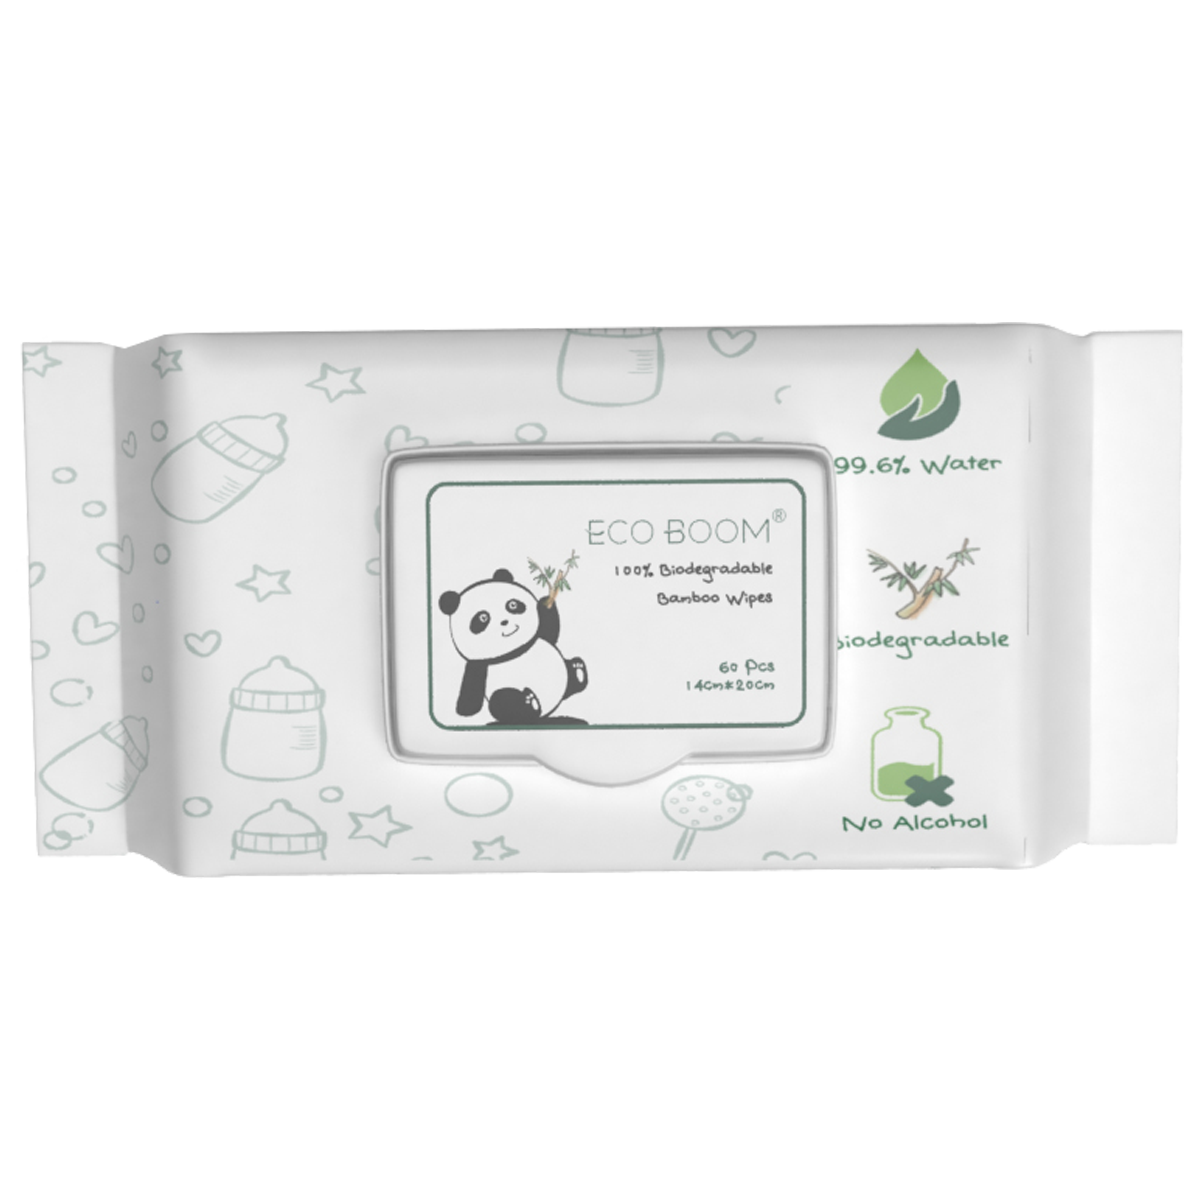 ECO BOOM Eco Friendly 100% Biodegradable Bamboo Water Wipes 60 sheets